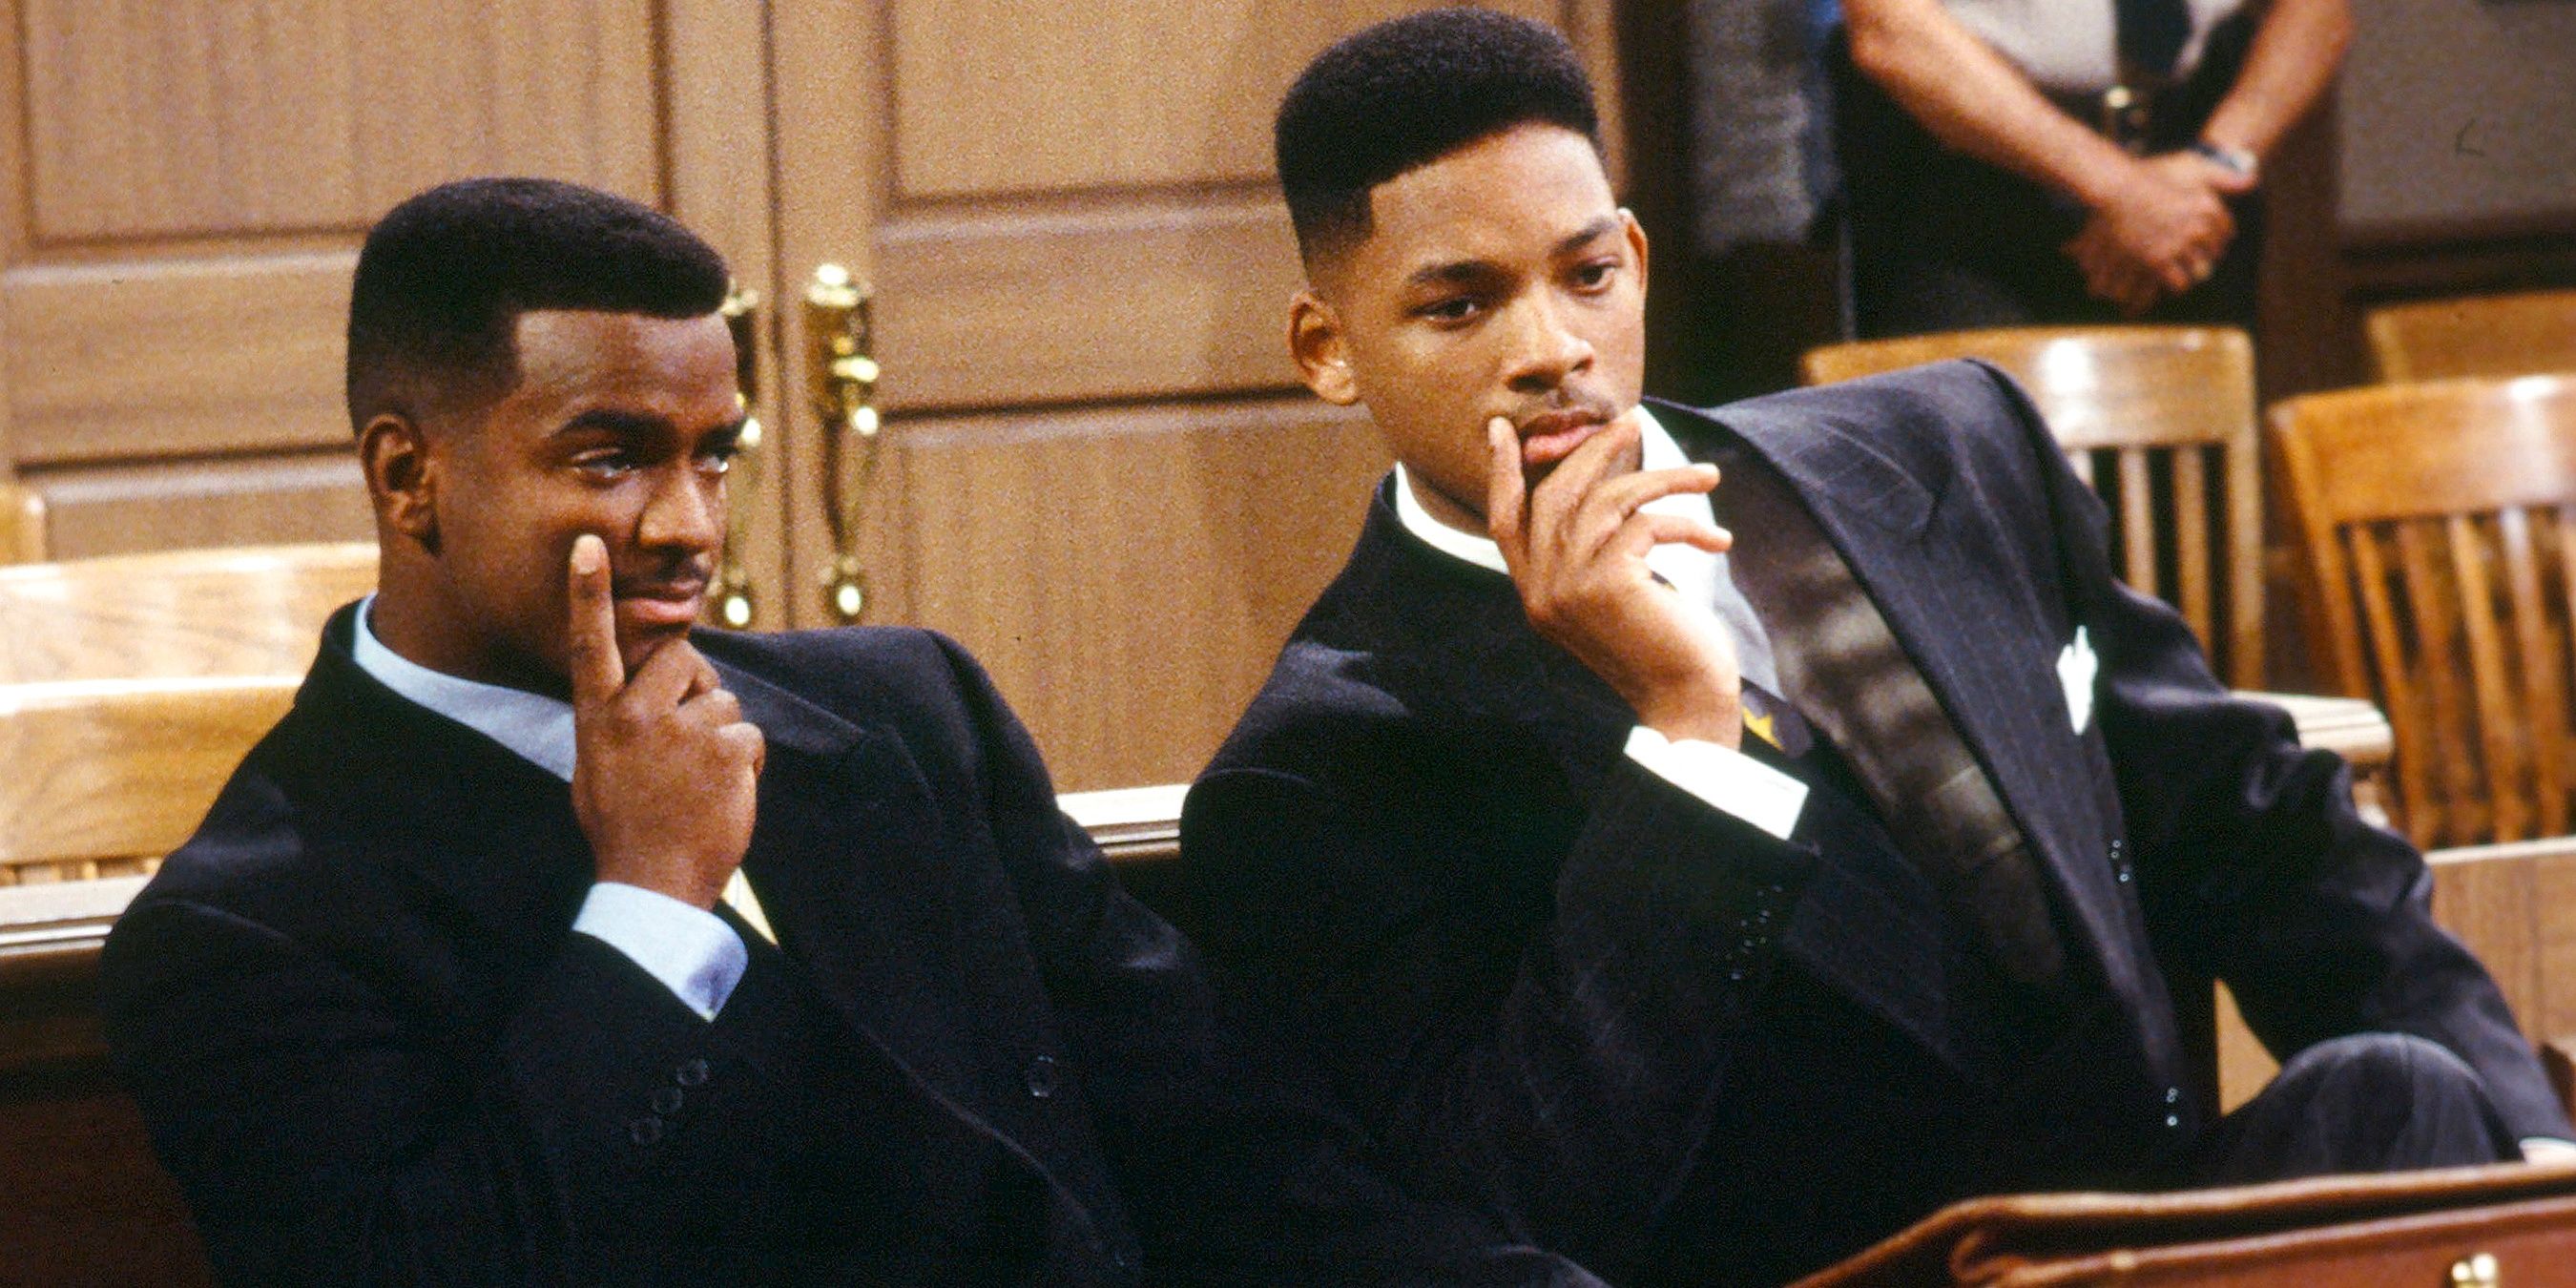 Carlton and Will at court